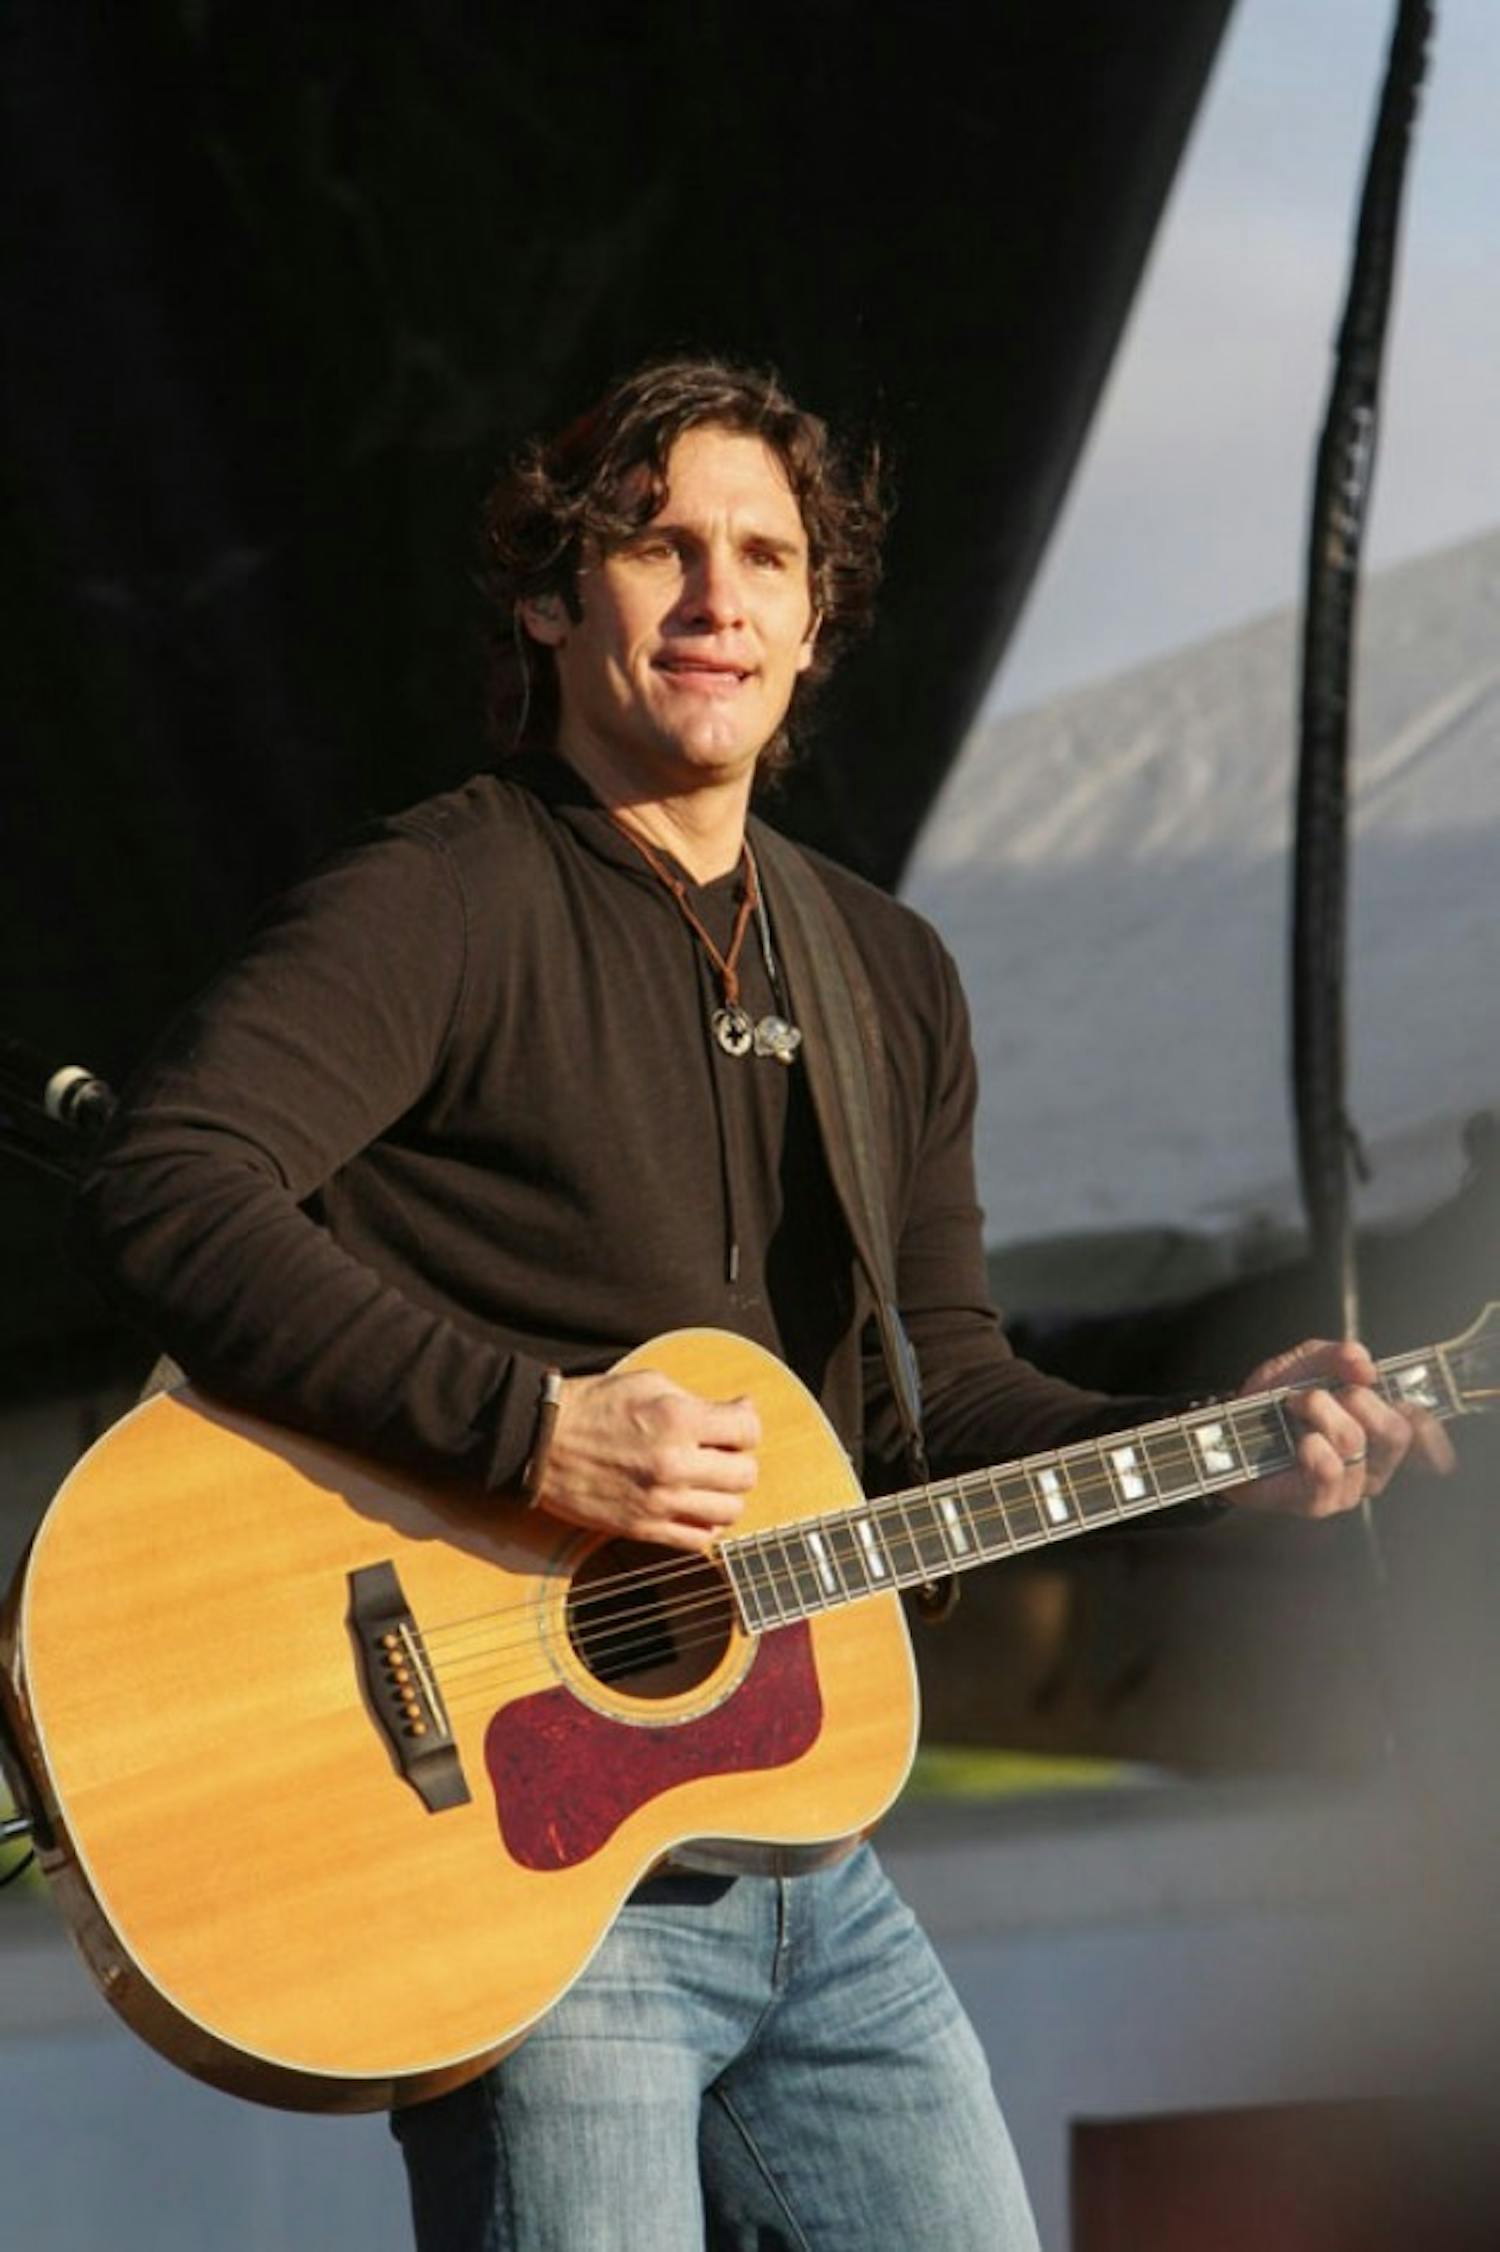 Country star Joe Nichols was the second artist to appear this
season as part of UB Athletics&rsquo; Tailgate Concert Series. He played a
collection of his own work, including his hit single &ldquo;Sunny and 75.&rdquo;
Chad Cooper, The Spectrum